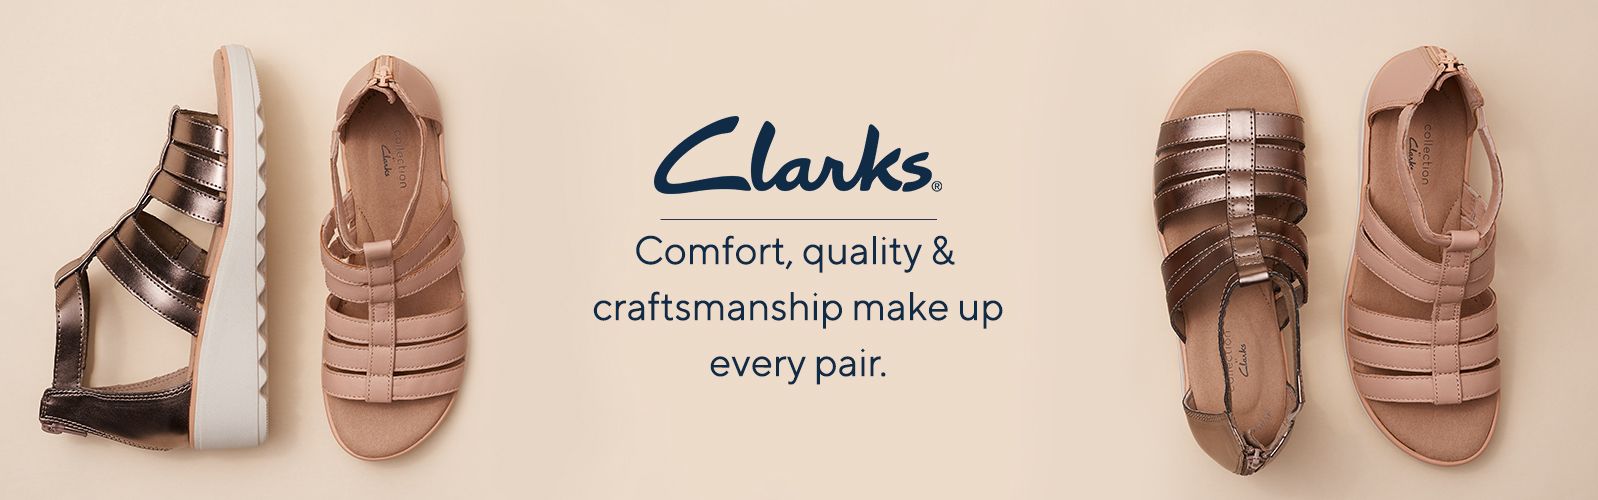 clarks bendables mary jane shoes